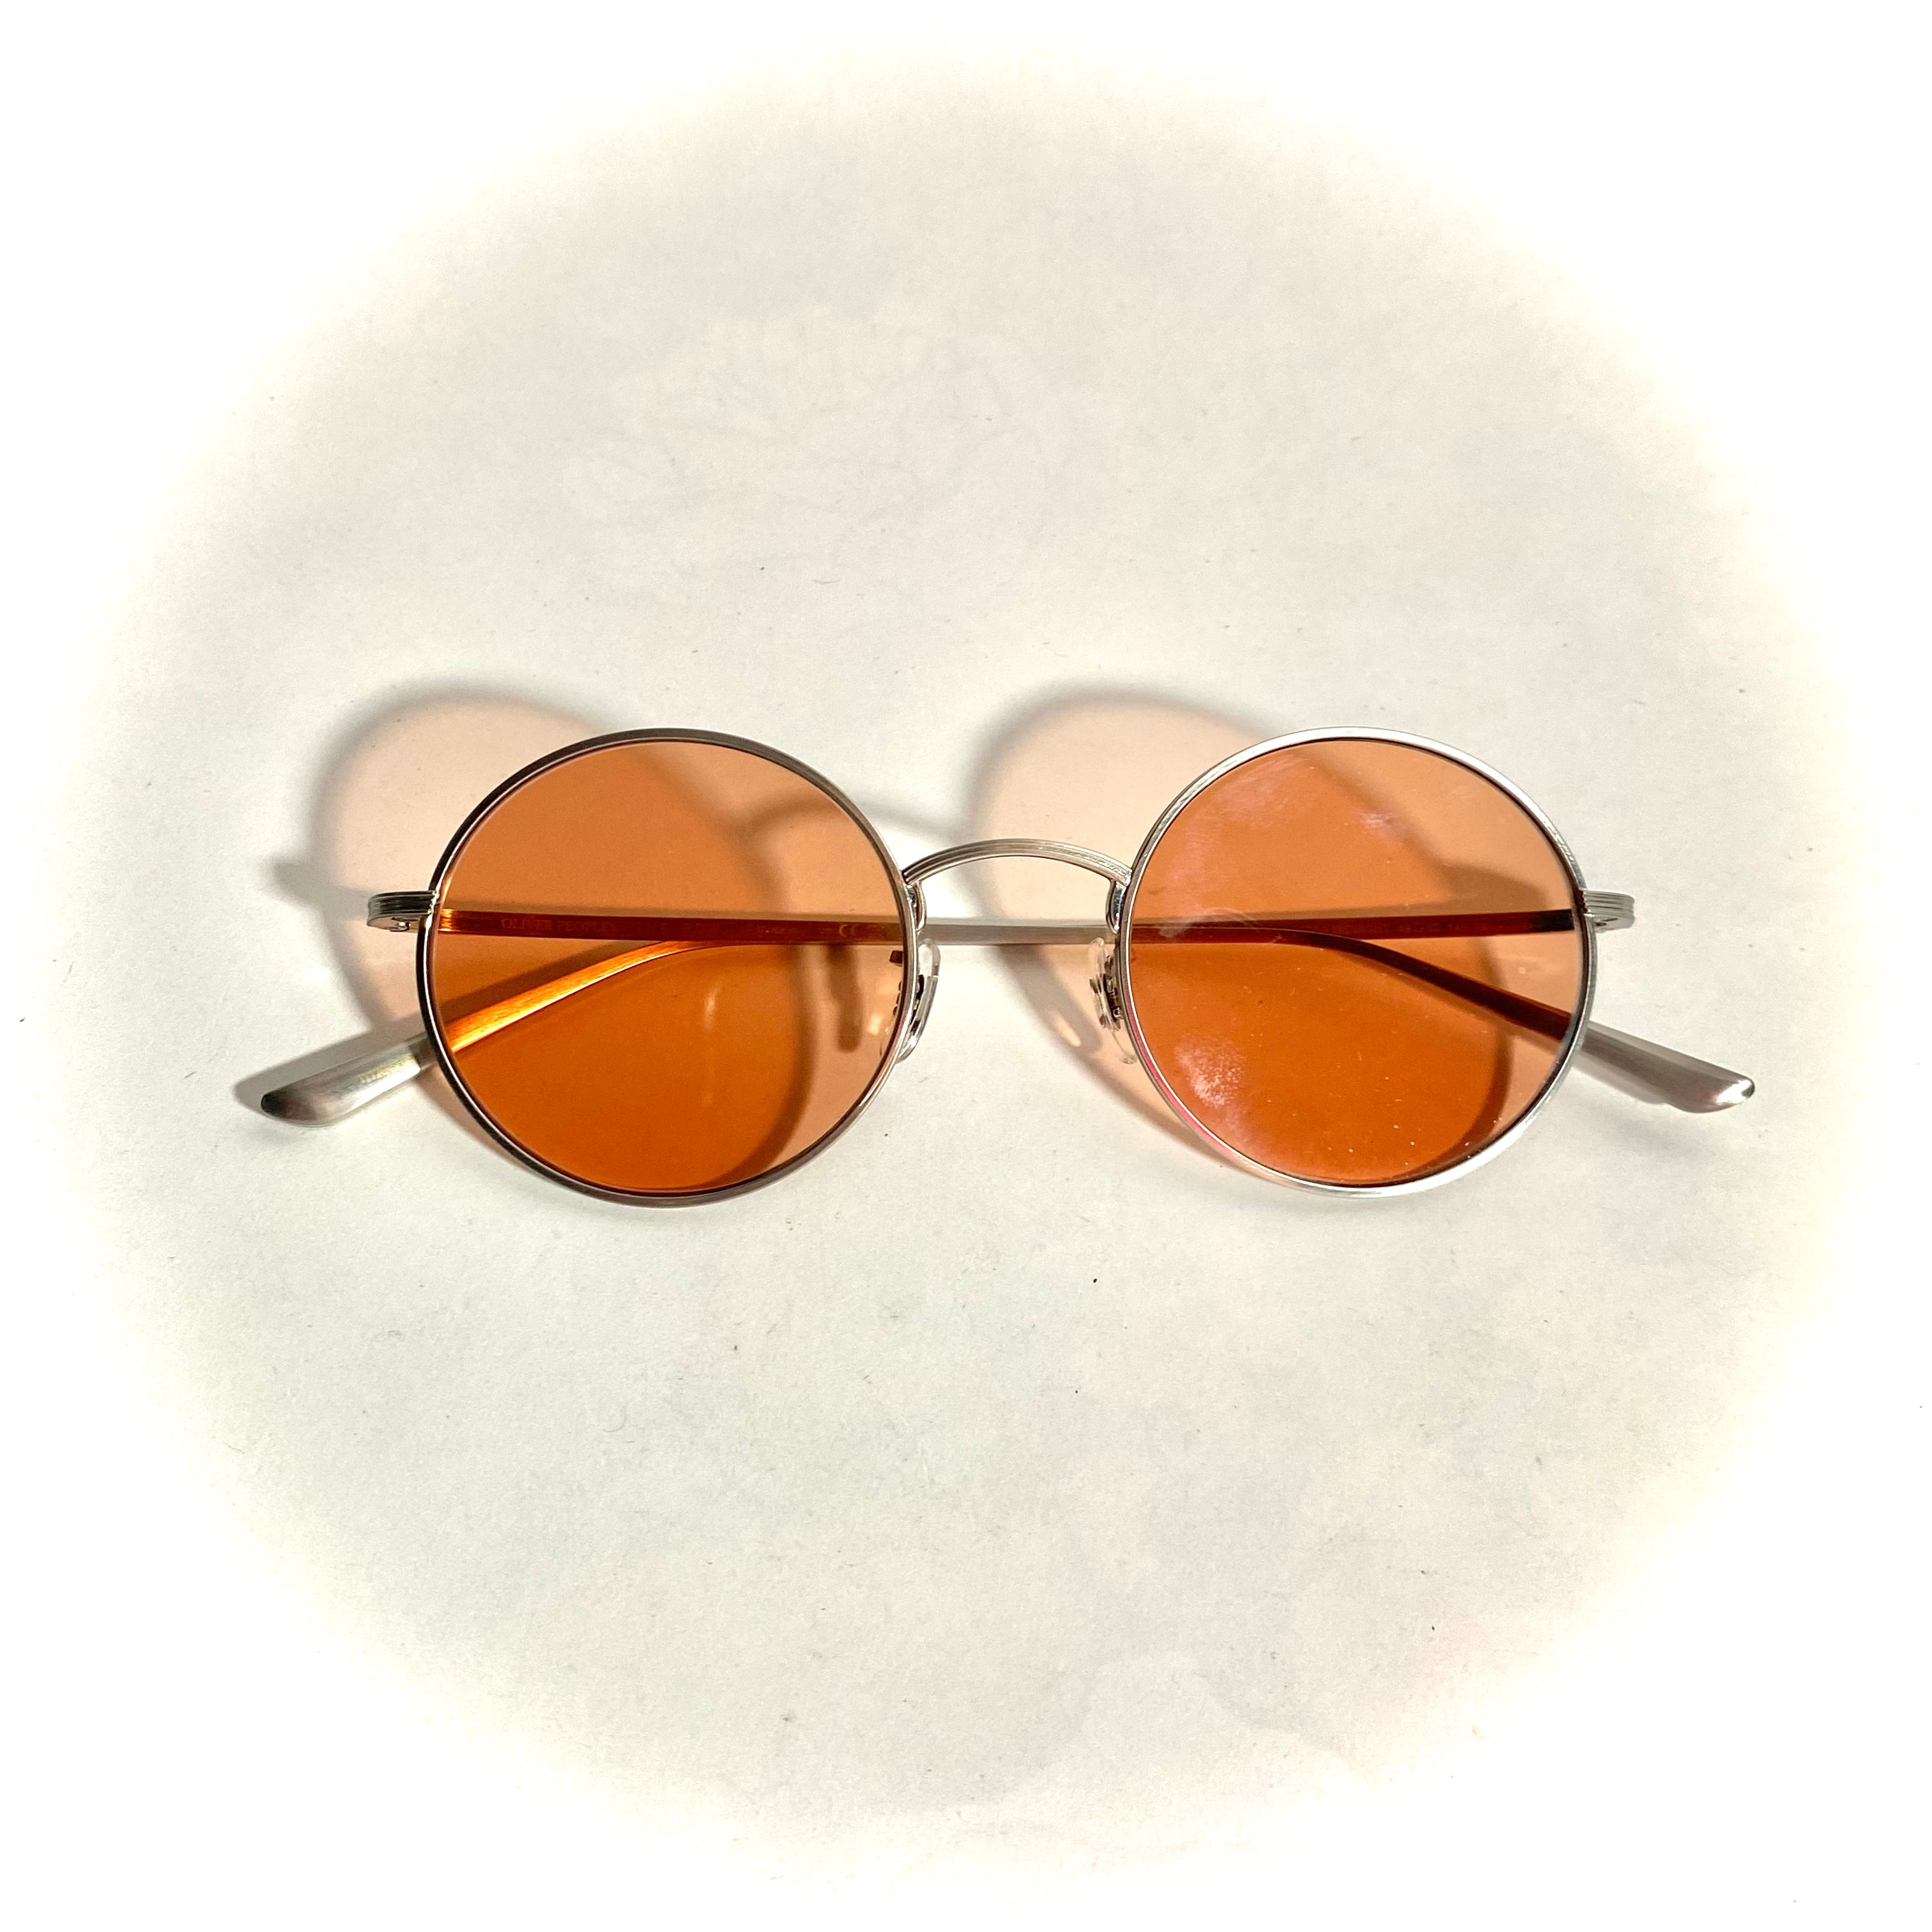 Oliver Peoples for The Row Sunglasses